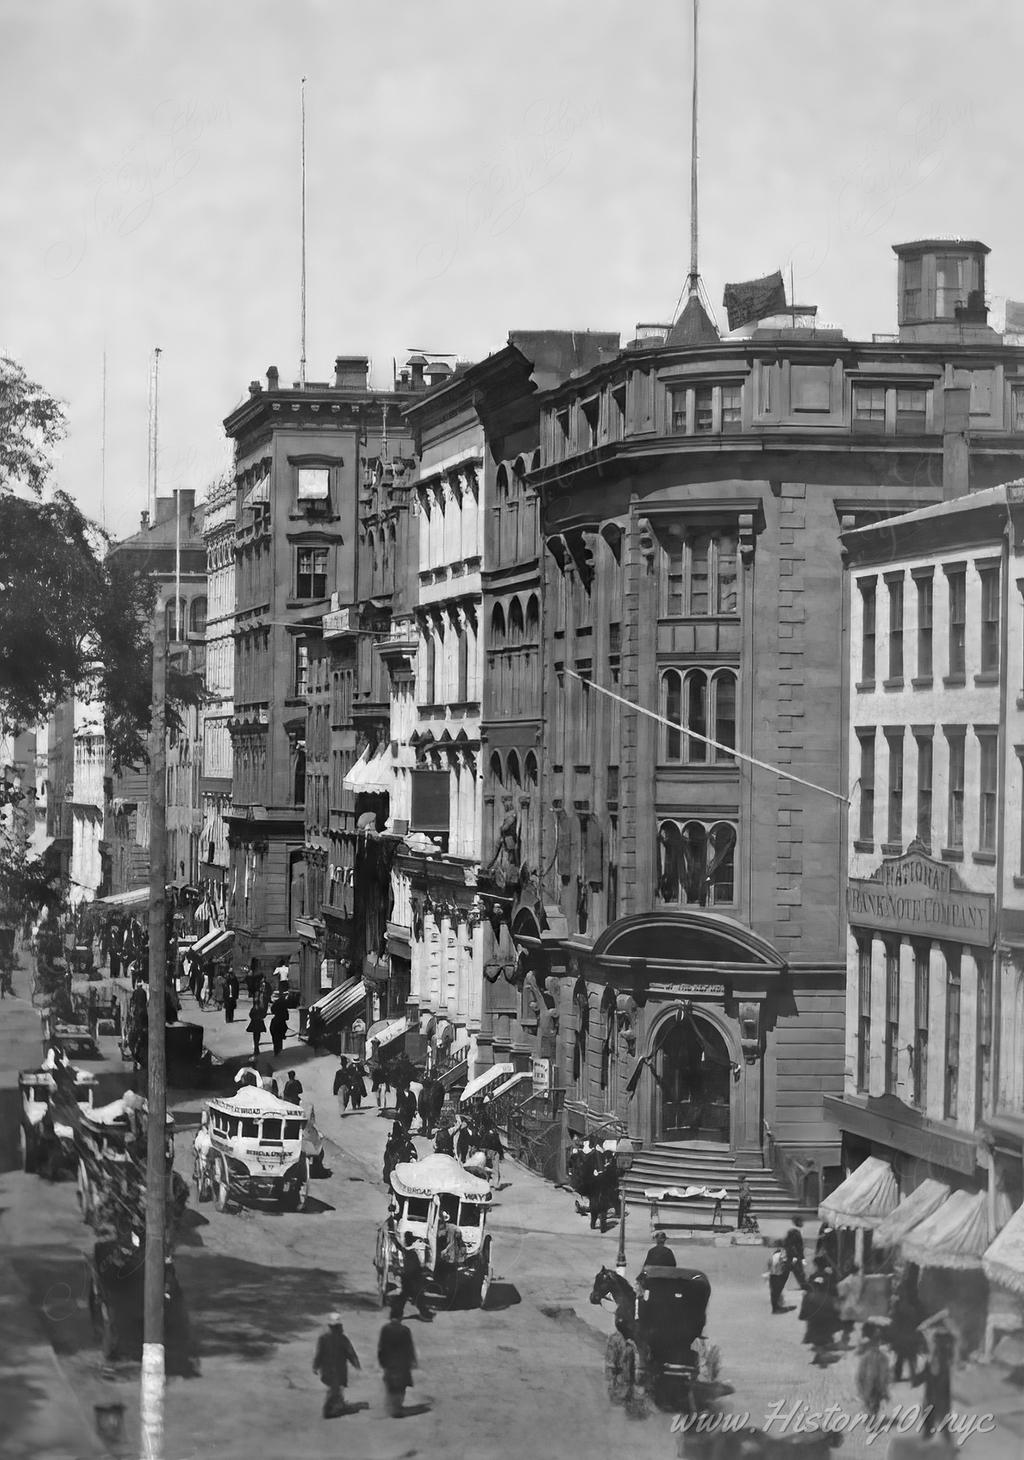 Photograph taken in 1865 shows the "National Bank of the Republic" (NBR) surrounded by other commercial buildings, pedestrians and traffic on Broadway.